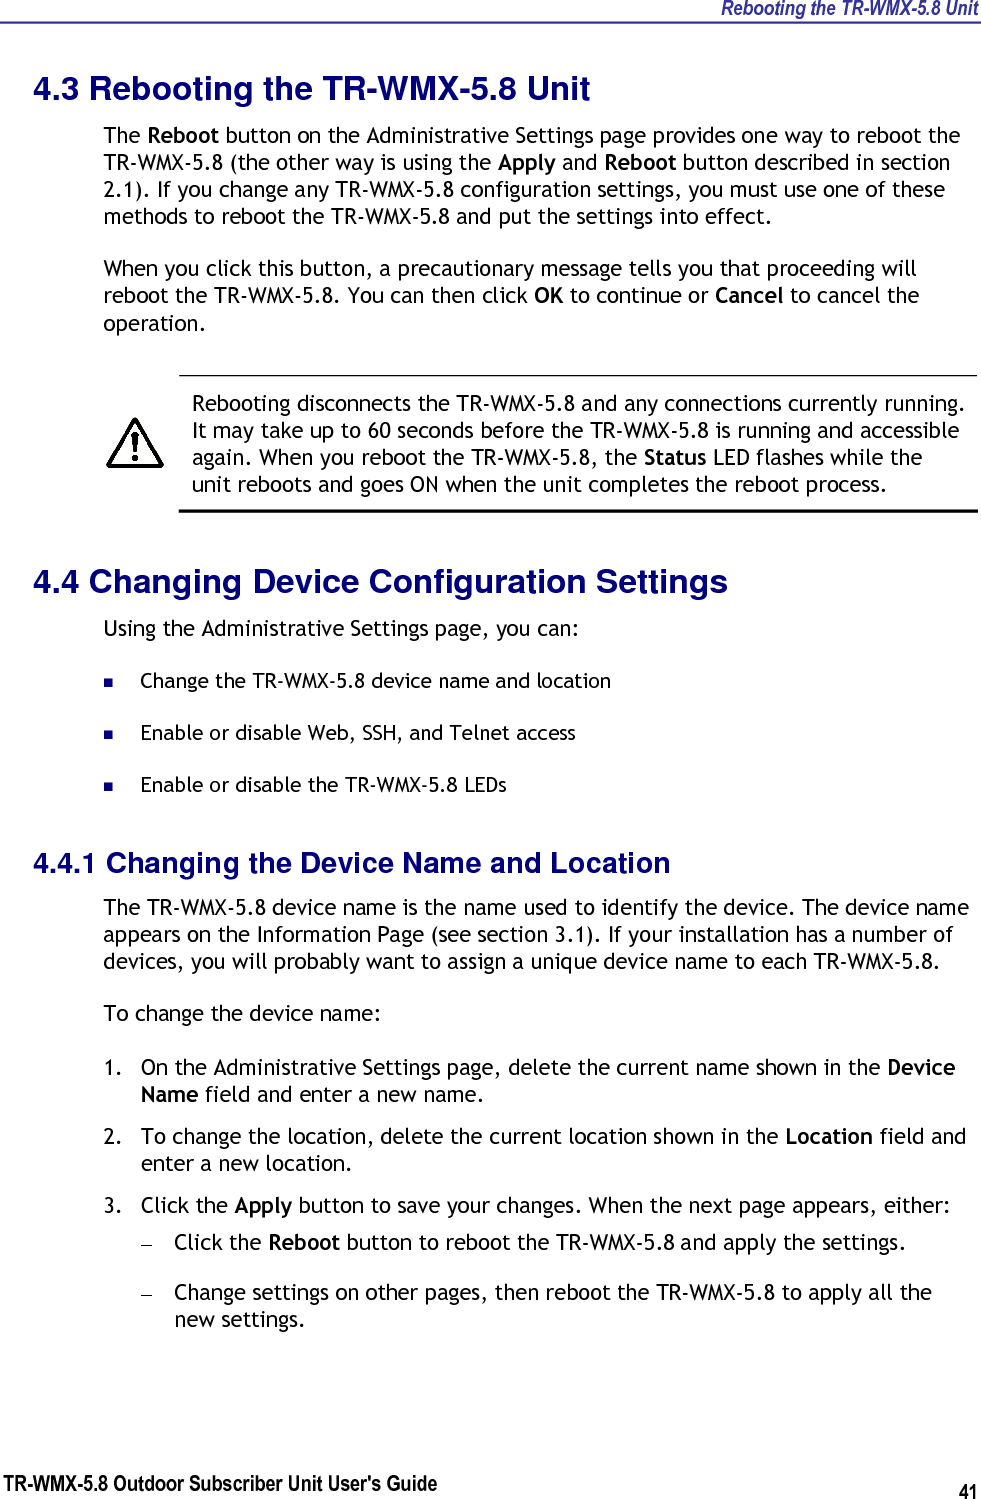 Rebooting the TR-WMX-5.8 Unit TR-WMX-5.8 Outdoor Subscriber Unit User&apos;s Guide 41 4.3 Rebooting the TR-WMX-5.8 Unit The Reboot button on the Administrative Settings page provides one way to reboot the TR-WMX-5.8 (the other way is using the Apply and Reboot button described in section 2.1). If you change any TR-WMX-5.8 configuration settings, you must use one of these methods to reboot the TR-WMX-5.8 and put the settings into effect. When you click this button, a precautionary message tells you that proceeding will reboot the TR-WMX-5.8. You can then click OK to continue or Cancel to cancel the operation.    Rebooting disconnects the TR-WMX-5.8 and any connections currently running. It may take up to 60 seconds before the TR-WMX-5.8 is running and accessible again. When you reboot the TR-WMX-5.8, the Status LED flashes while the unit reboots and goes ON when the unit completes the reboot process. 4.4 Changing Device Configuration Settings Using the Administrative Settings page, you can:  Change the TR-WMX-5.8 device name and location  Enable or disable Web, SSH, and Telnet access  Enable or disable the TR-WMX-5.8 LEDs 4.4.1 Changing the Device Name and Location The TR-WMX-5.8 device name is the name used to identify the device. The device name appears on the Information Page (see section 3.1). If your installation has a number of devices, you will probably want to assign a unique device name to each TR-WMX-5.8. To change the device name: 1. On the Administrative Settings page, delete the current name shown in the Device Name field and enter a new name. 2. To change the location, delete the current location shown in the Location field and enter a new location. 3. Click the Apply button to save your changes. When the next page appears, either: – Click the Reboot button to reboot the TR-WMX-5.8 and apply the settings. – Change settings on other pages, then reboot the TR-WMX-5.8 to apply all the new settings. 